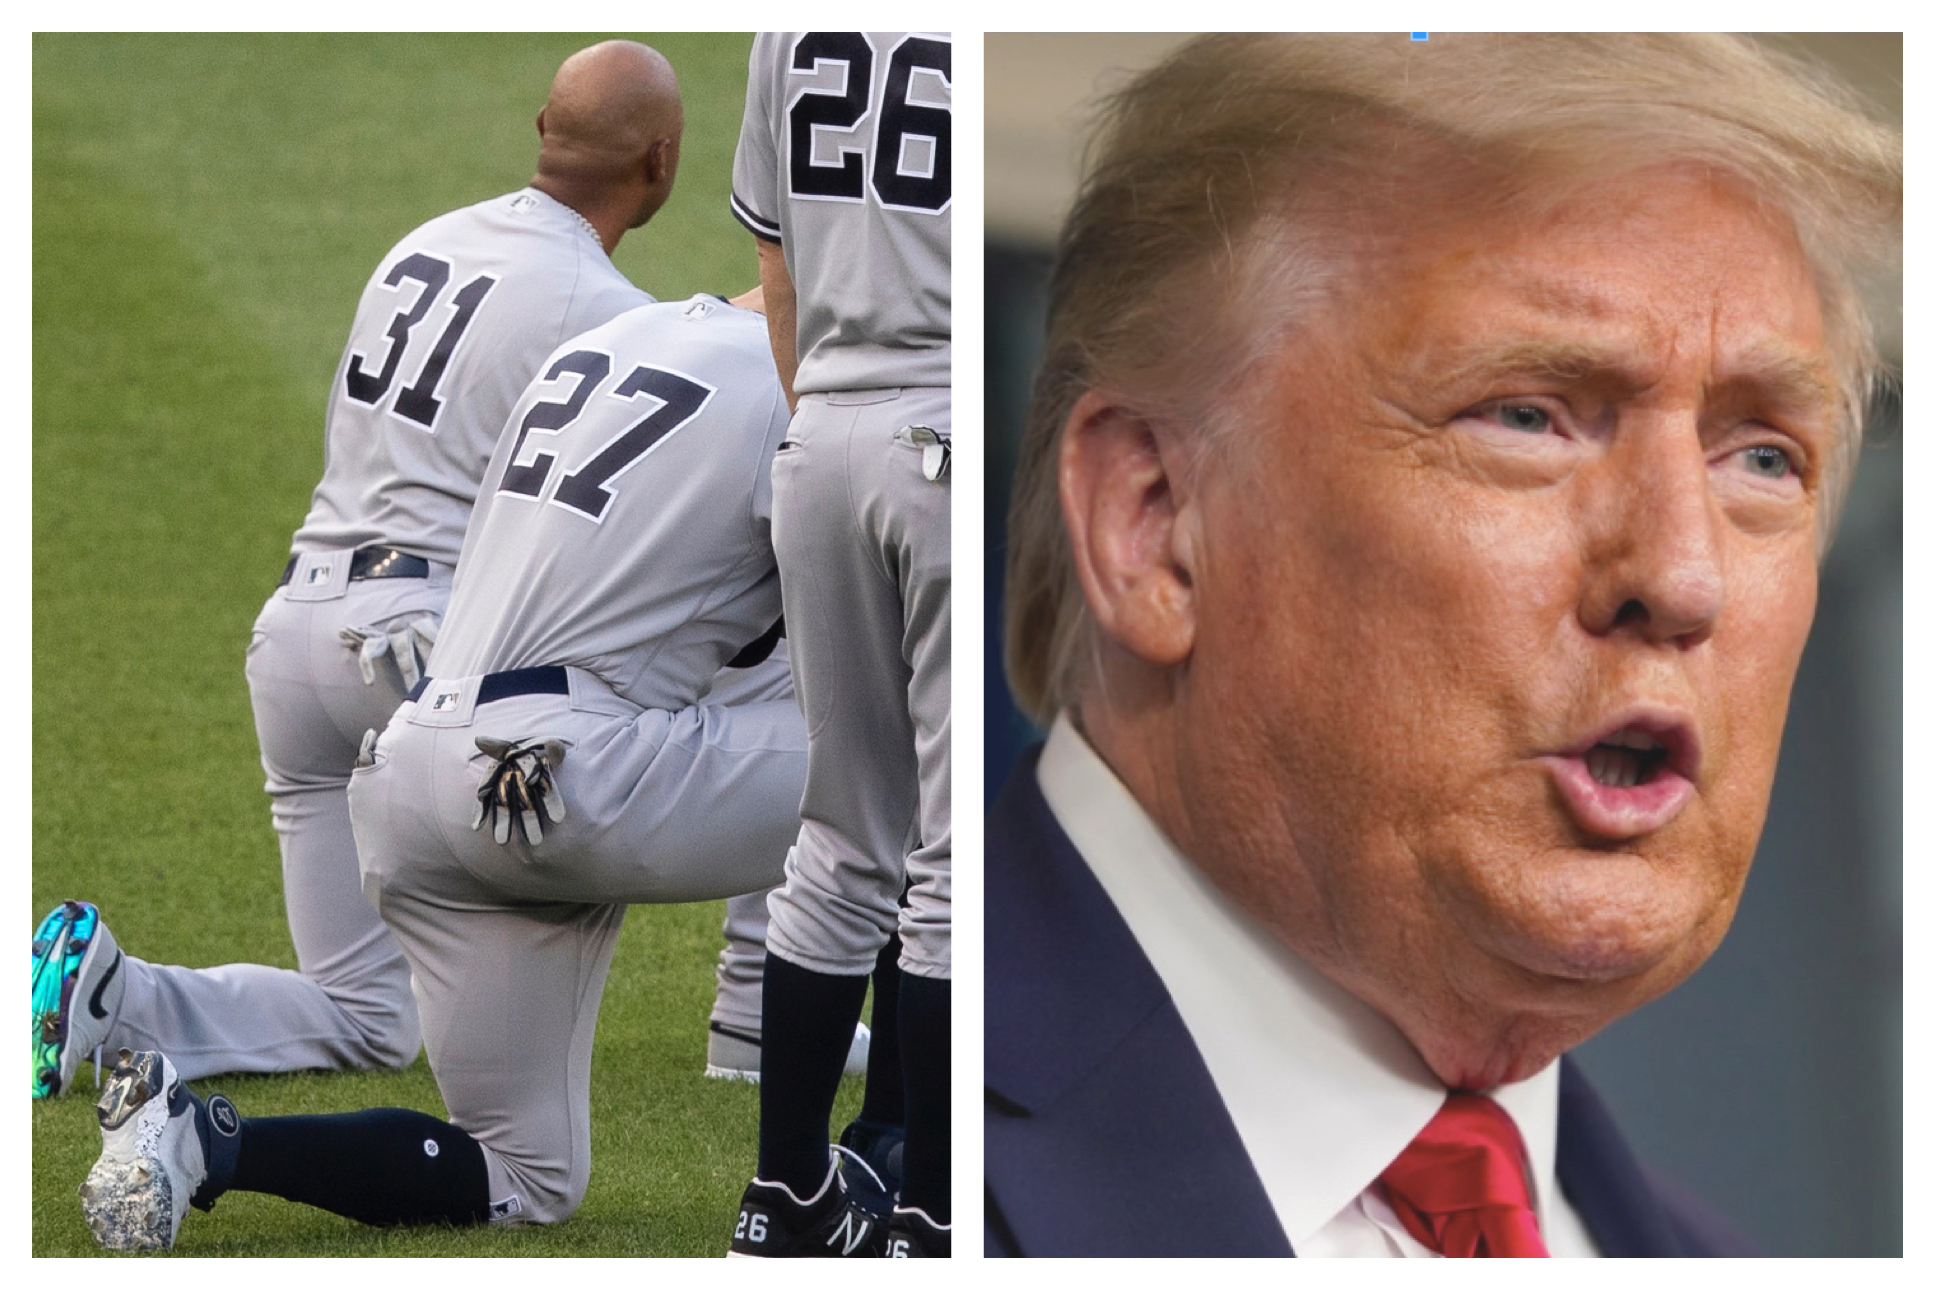 Trump backs out of Yankee Stadium first pitch